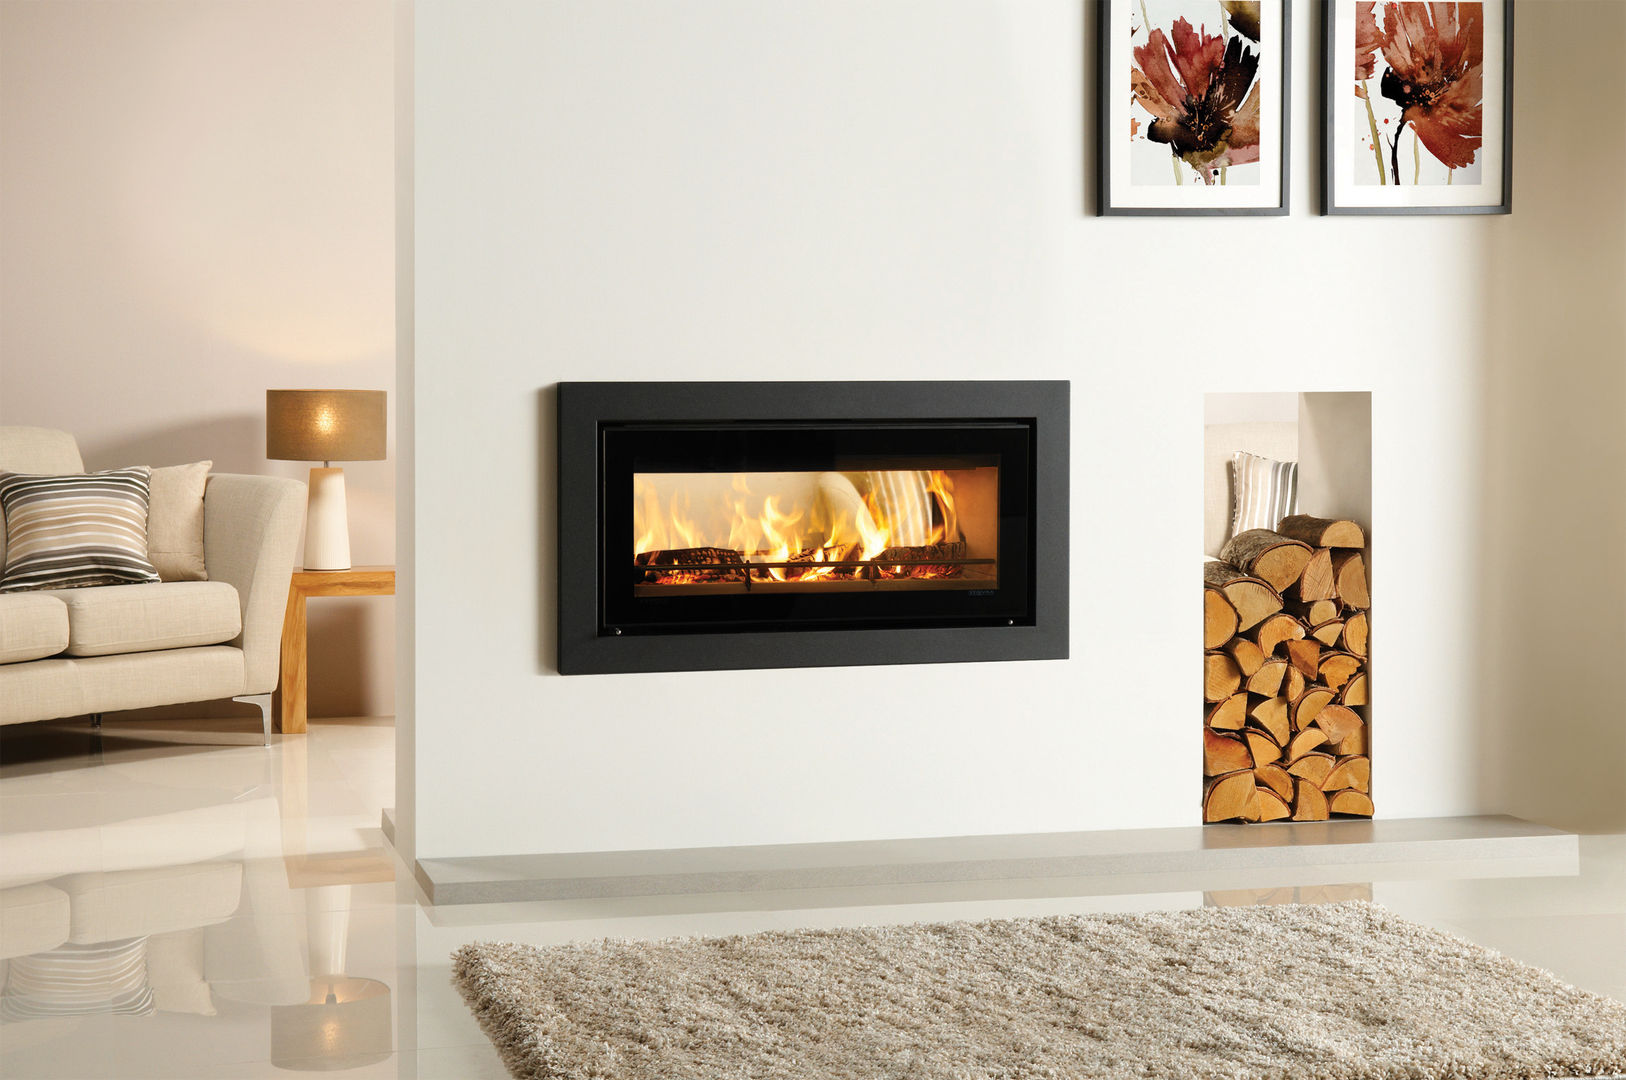 Riva Studio Duplex Fire Stovax Heating Group Living room Fireplaces & accessories